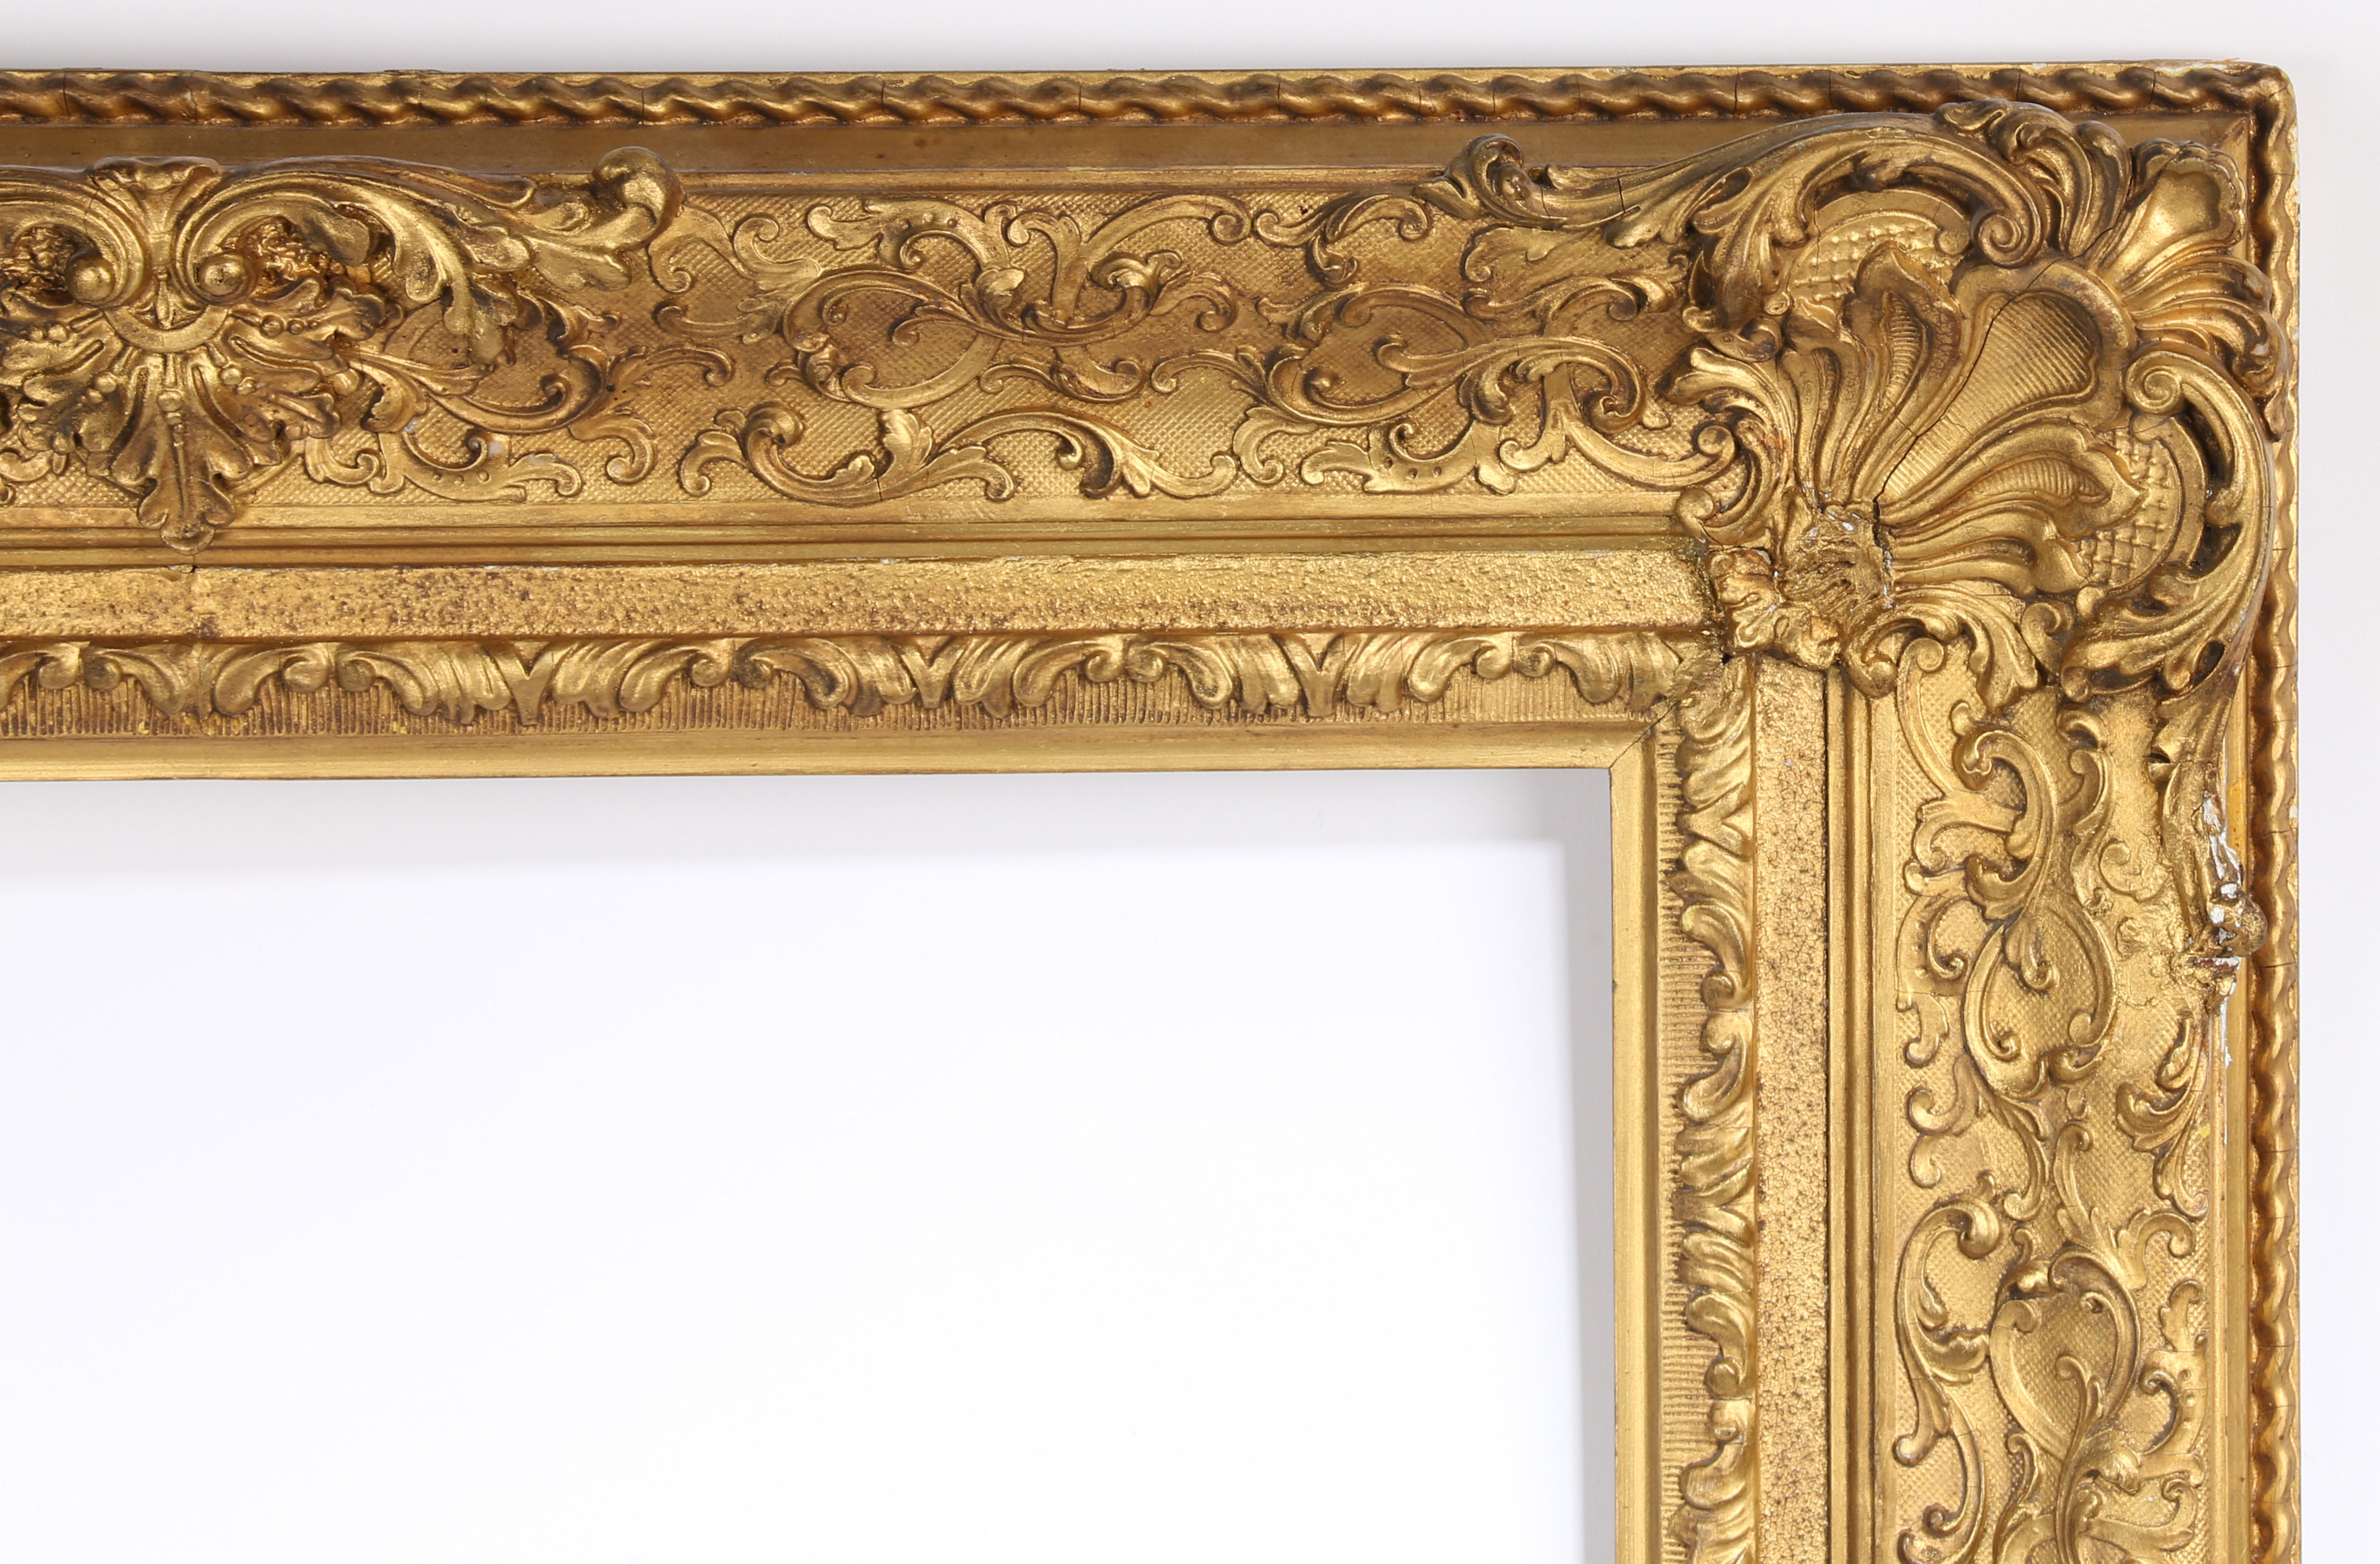 19th century English pattern picture frame with intricate centres and corners - rebate size 22in x